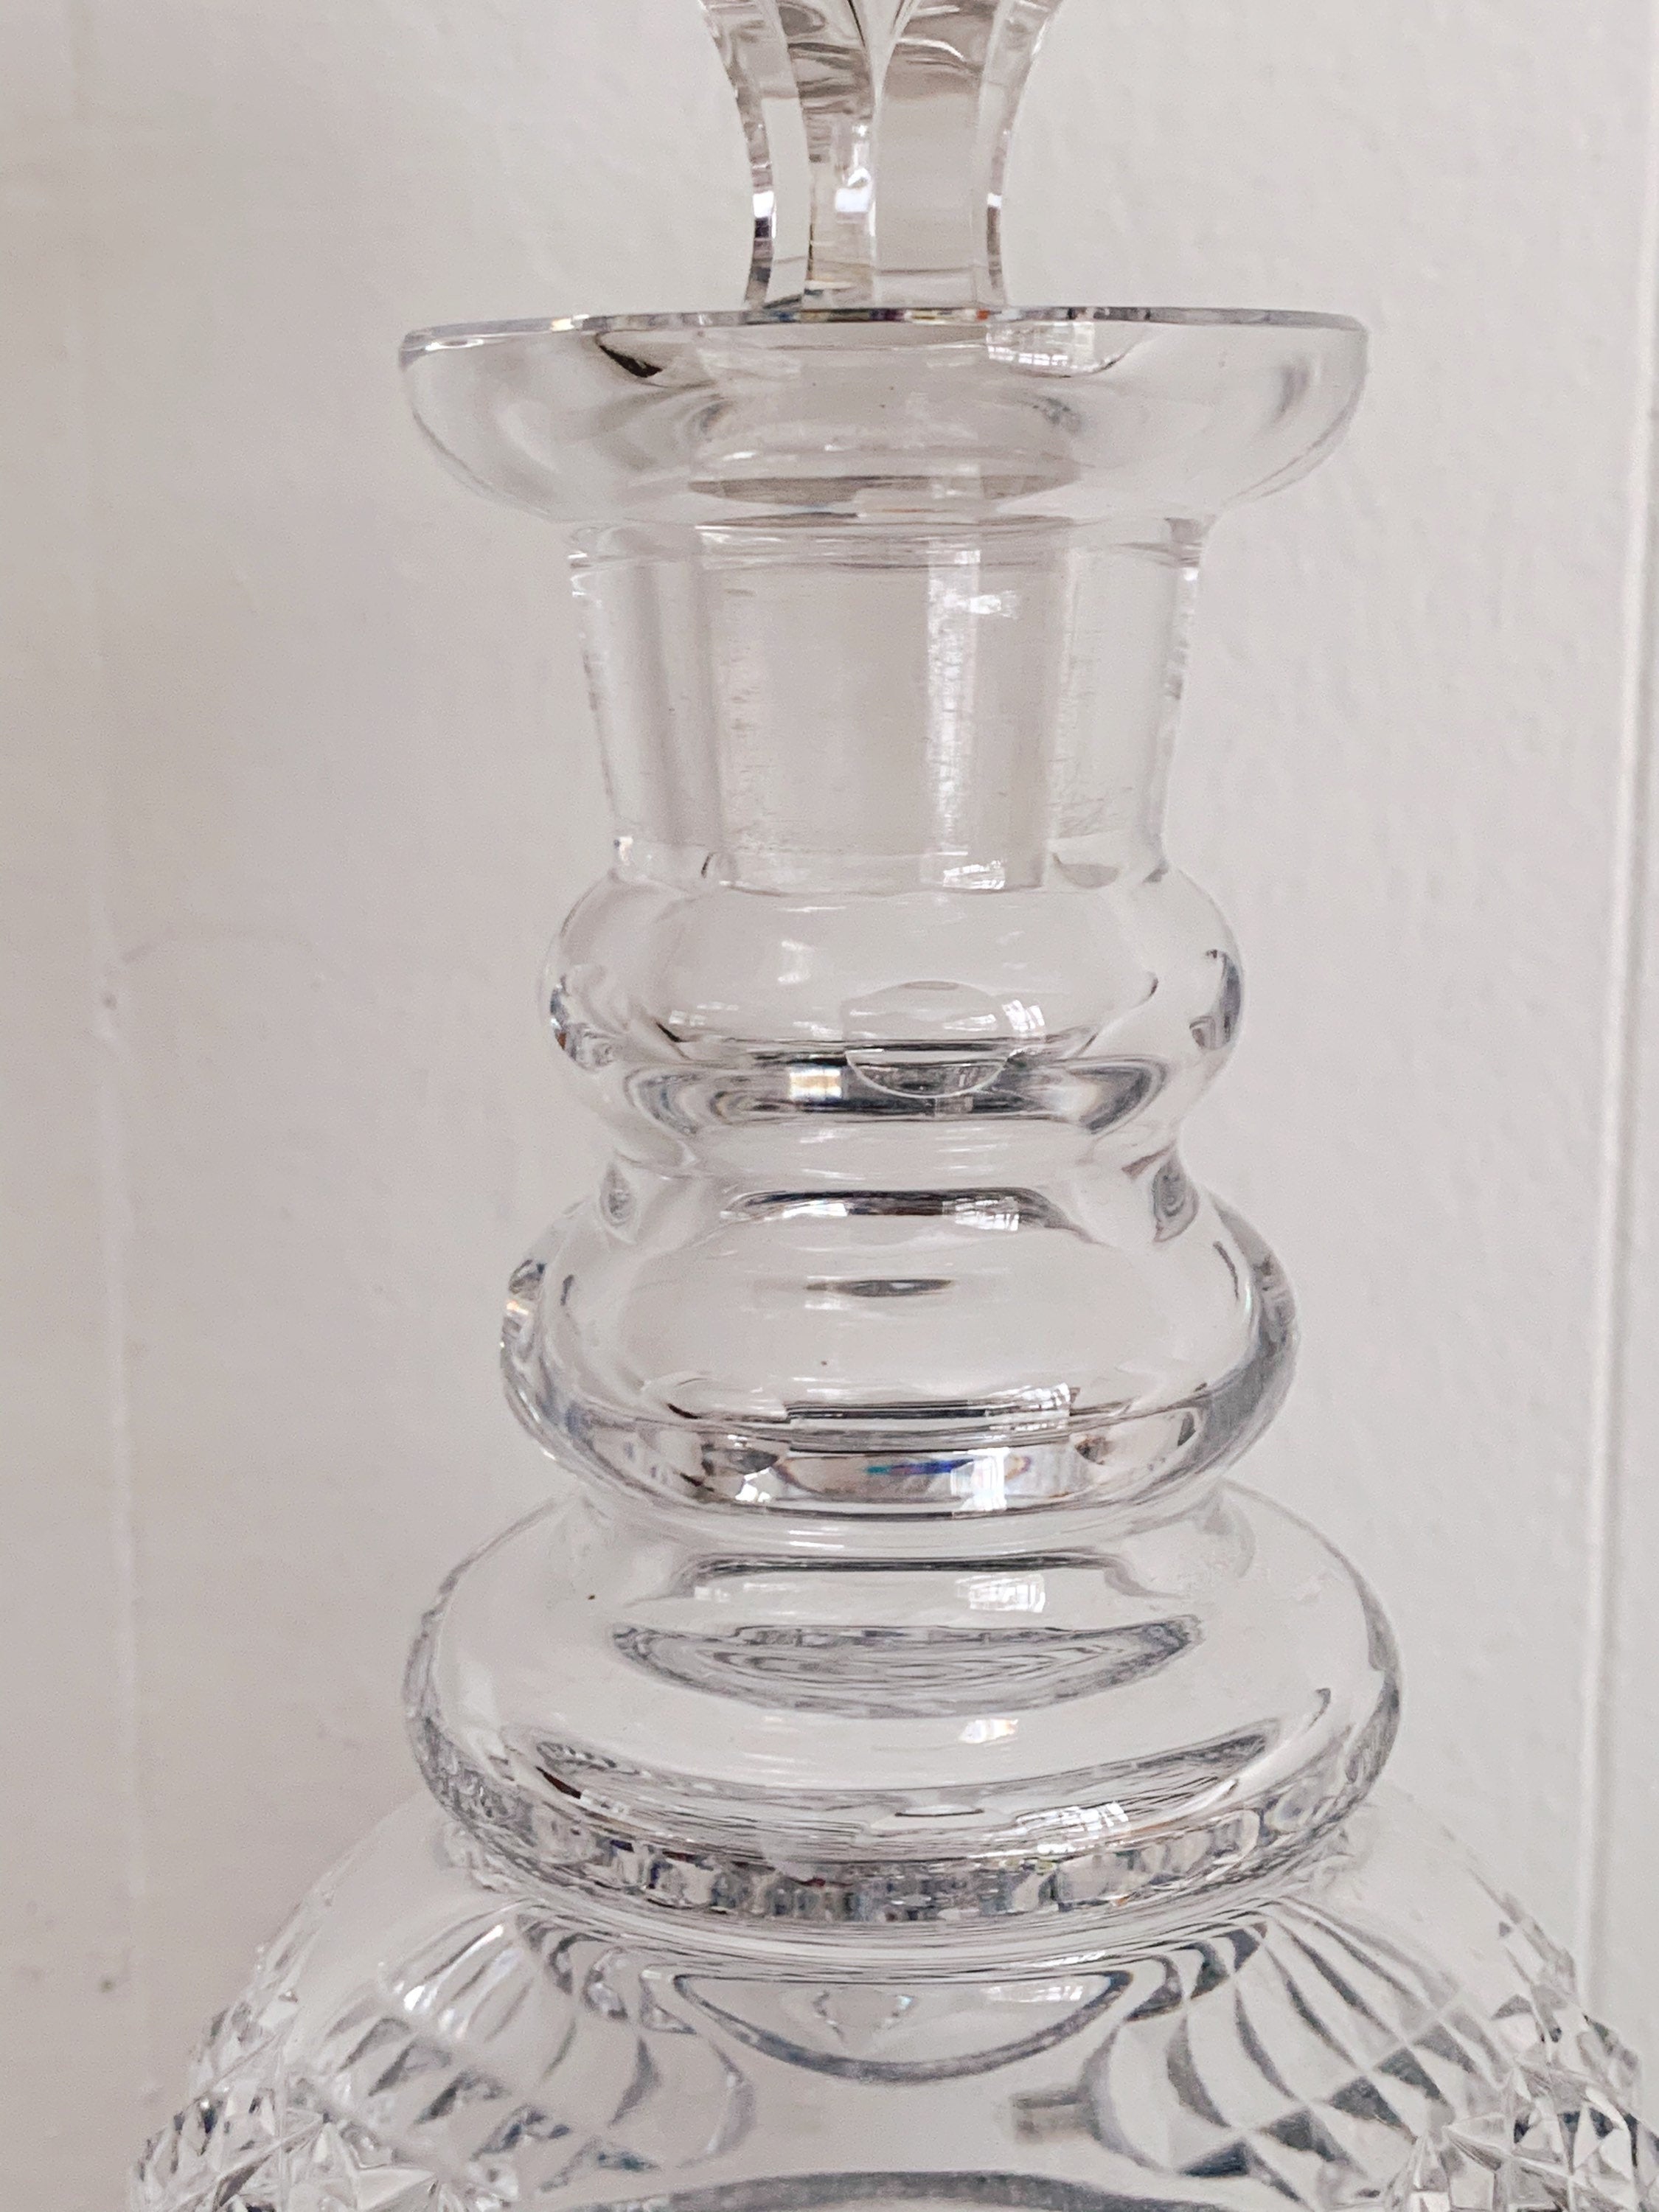 Vintage 19th Century Prussian Style Hand Blown and Cut Crystal Glass Decanter | Antique Barware Bar Cart Decor